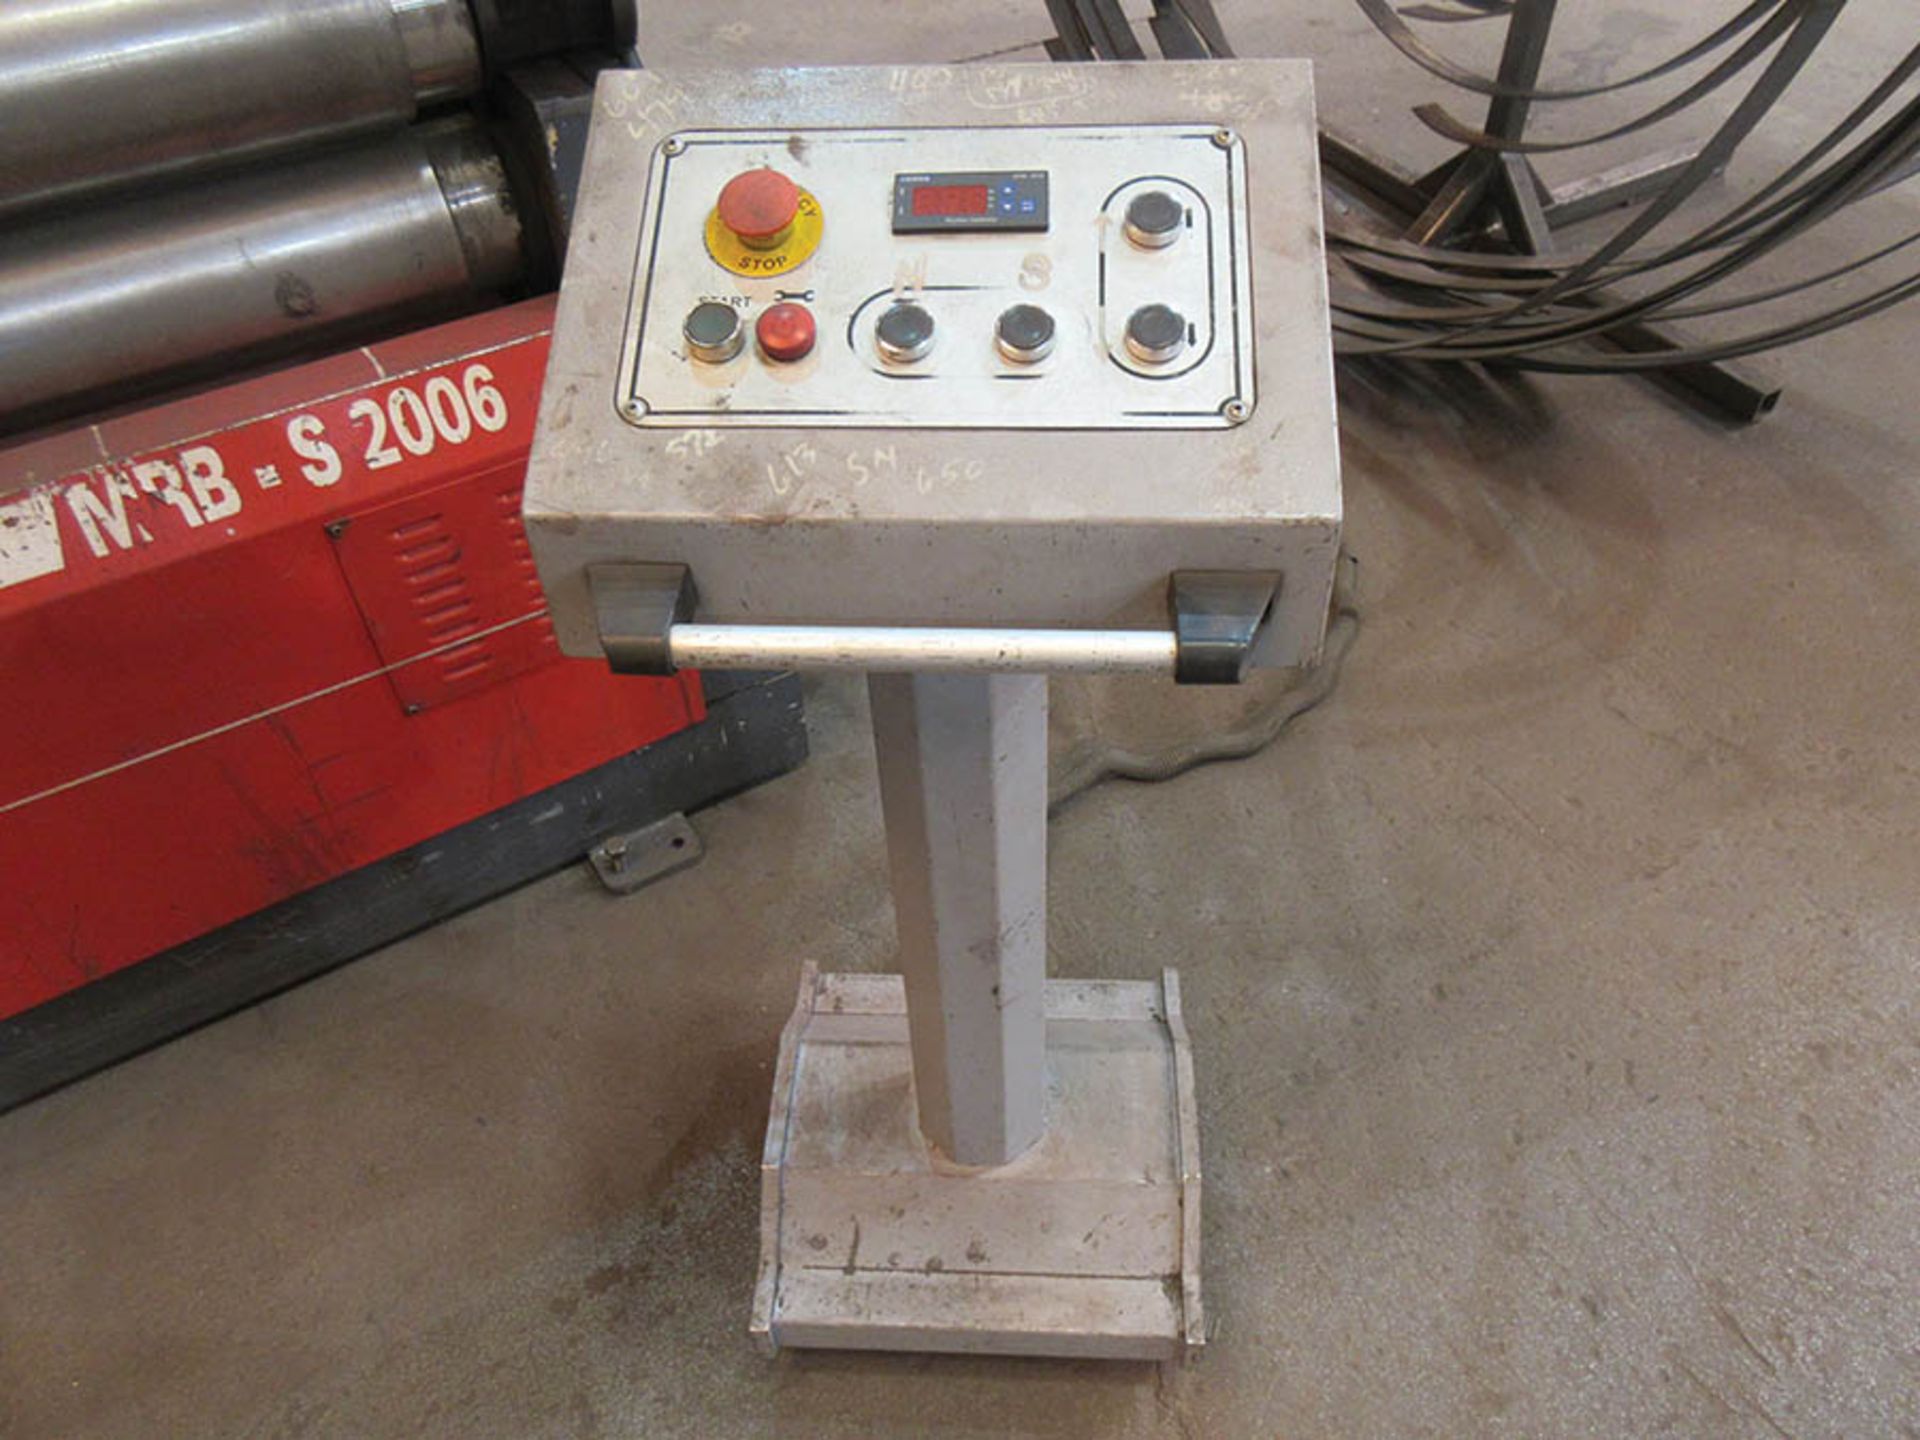 2012 JMT HYDRAULIC 3-ROLL INITIAL PINCH PLATE BENDER, TYPE: MRB-S 2006, CAPACITY: 6MM, WIDTH: - Image 9 of 9